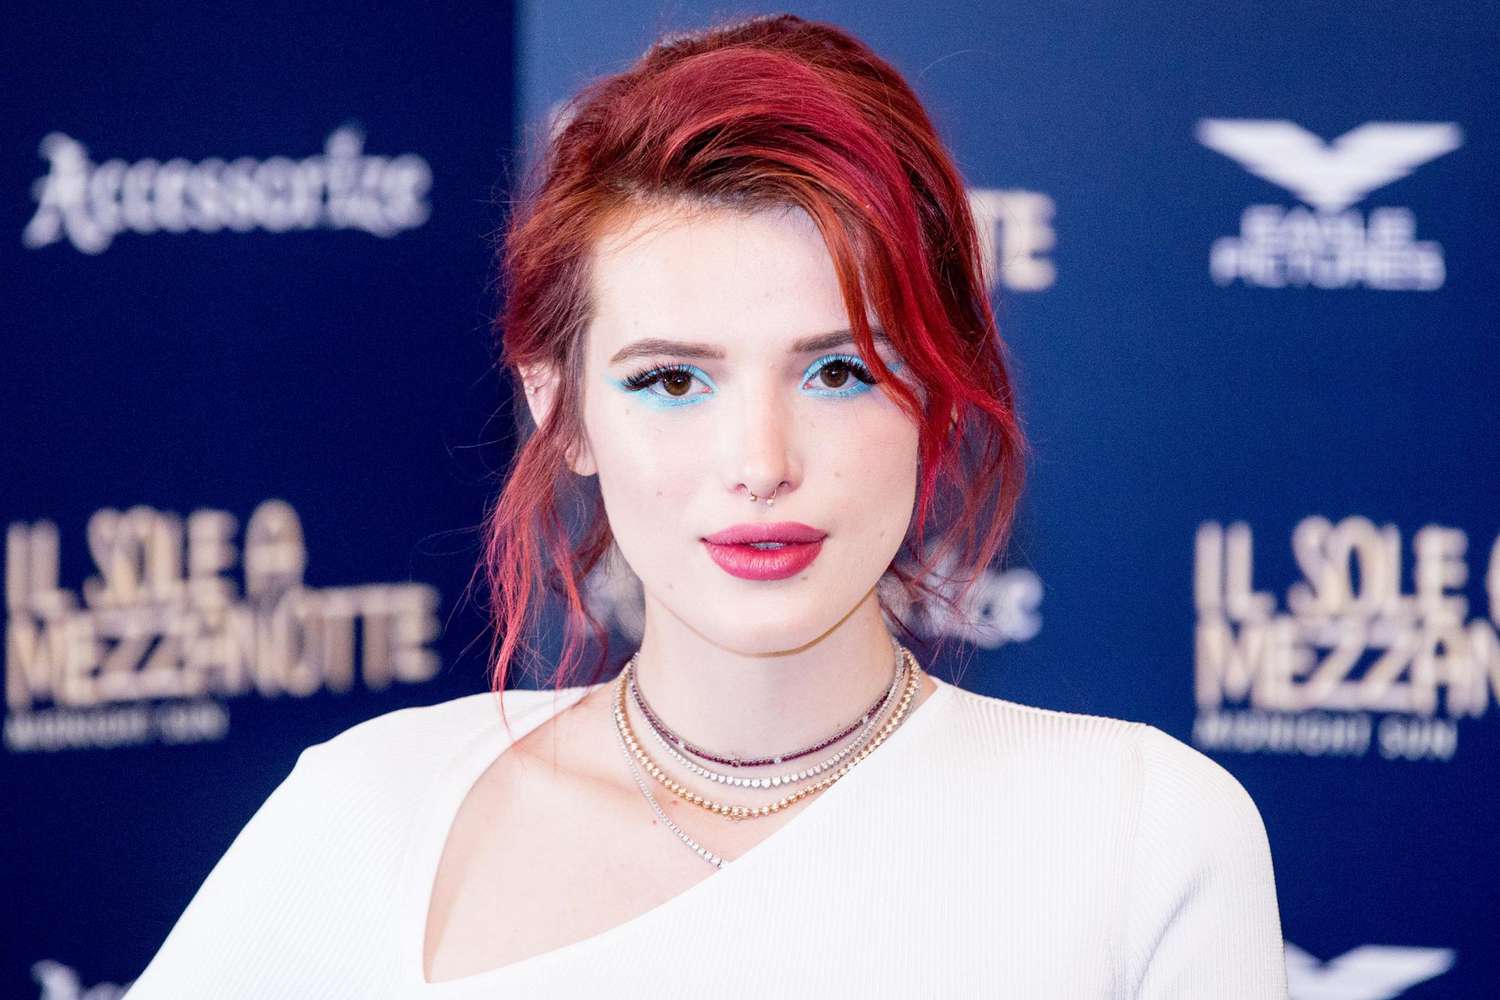 Photocall with the American singer and actress Bella Thorne